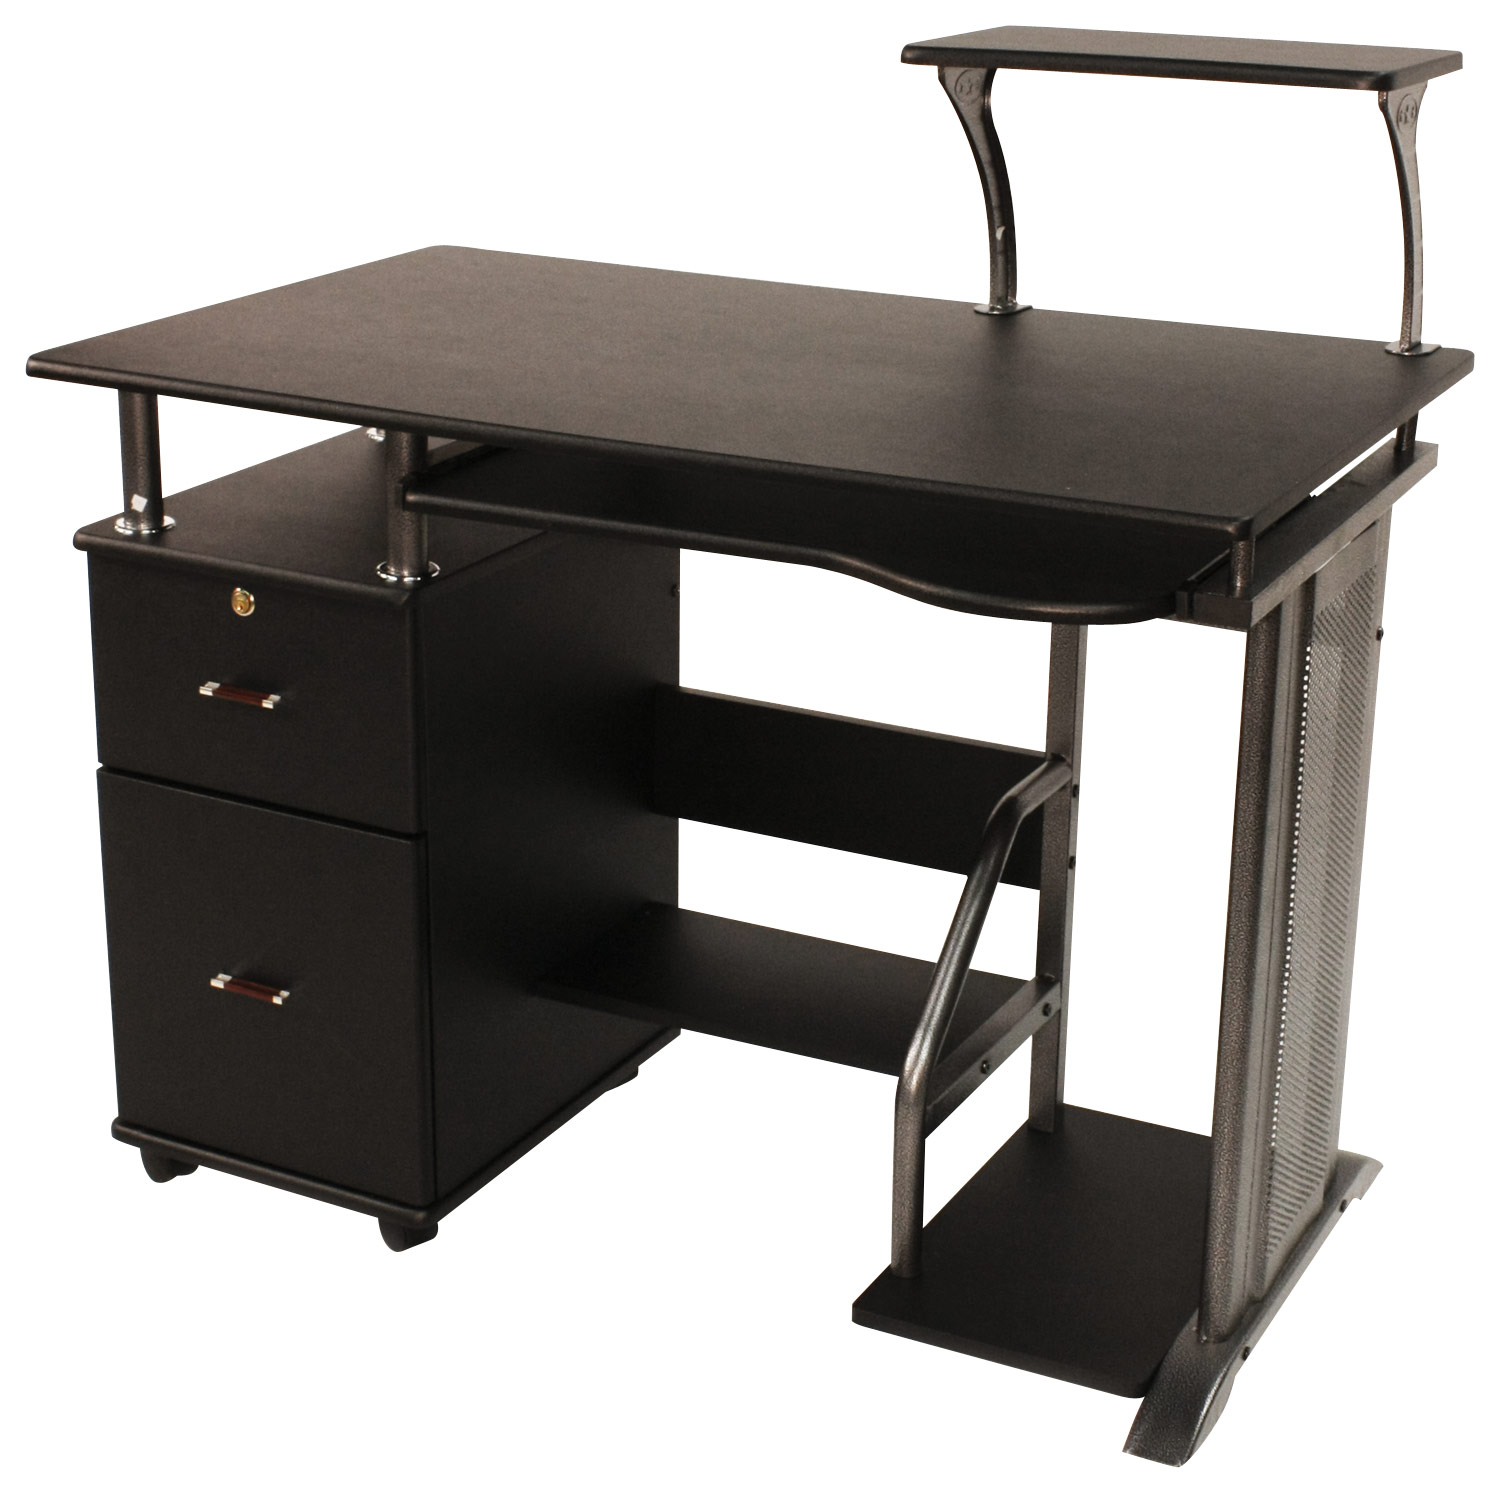 Comfort products incl. - rothmin computer desk - black - larger front FGLUYBA